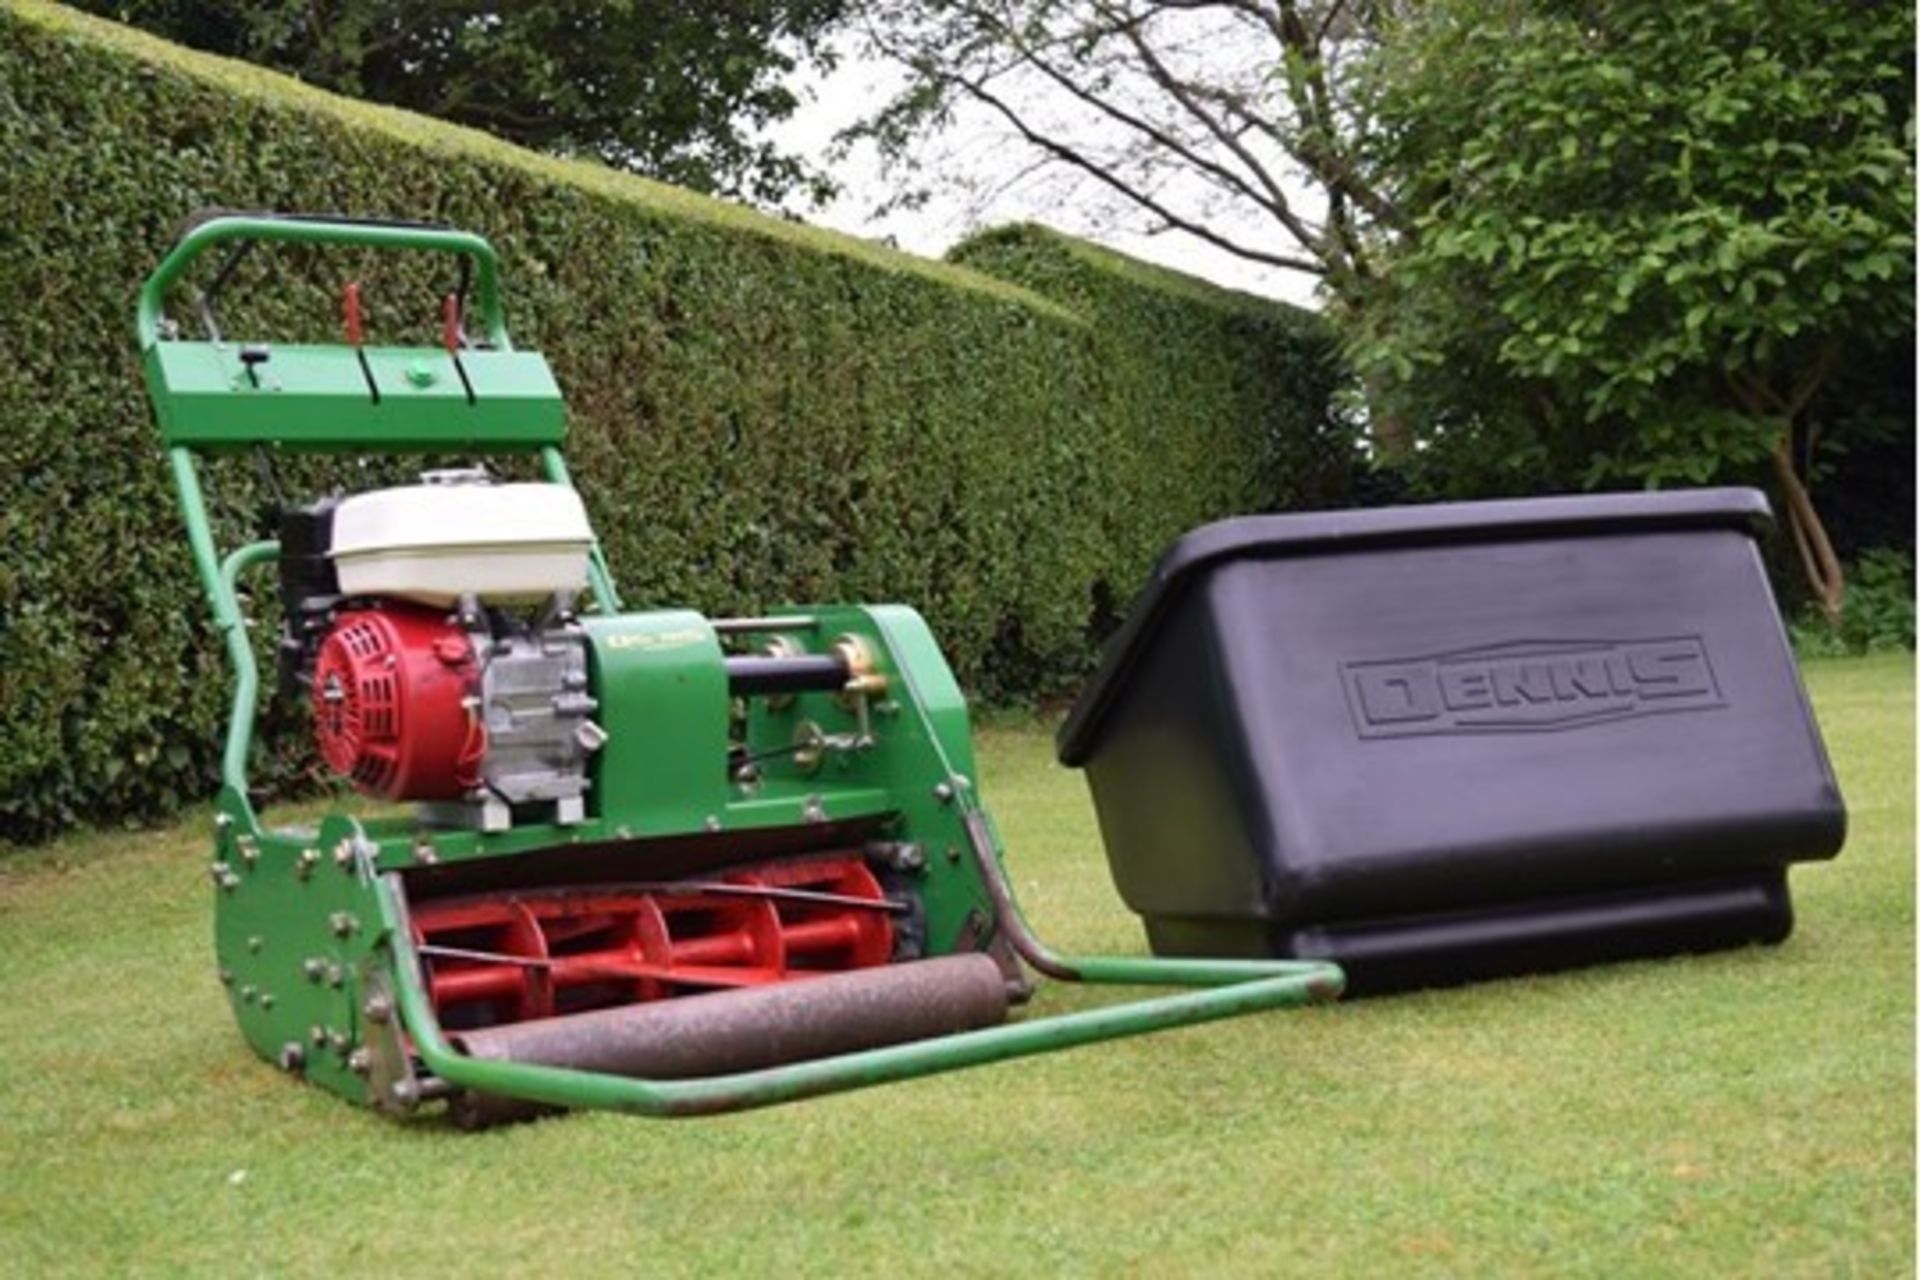 2004 Dennis G560 5 Blade Cylinder Mower With Grass Box - Image 10 of 12